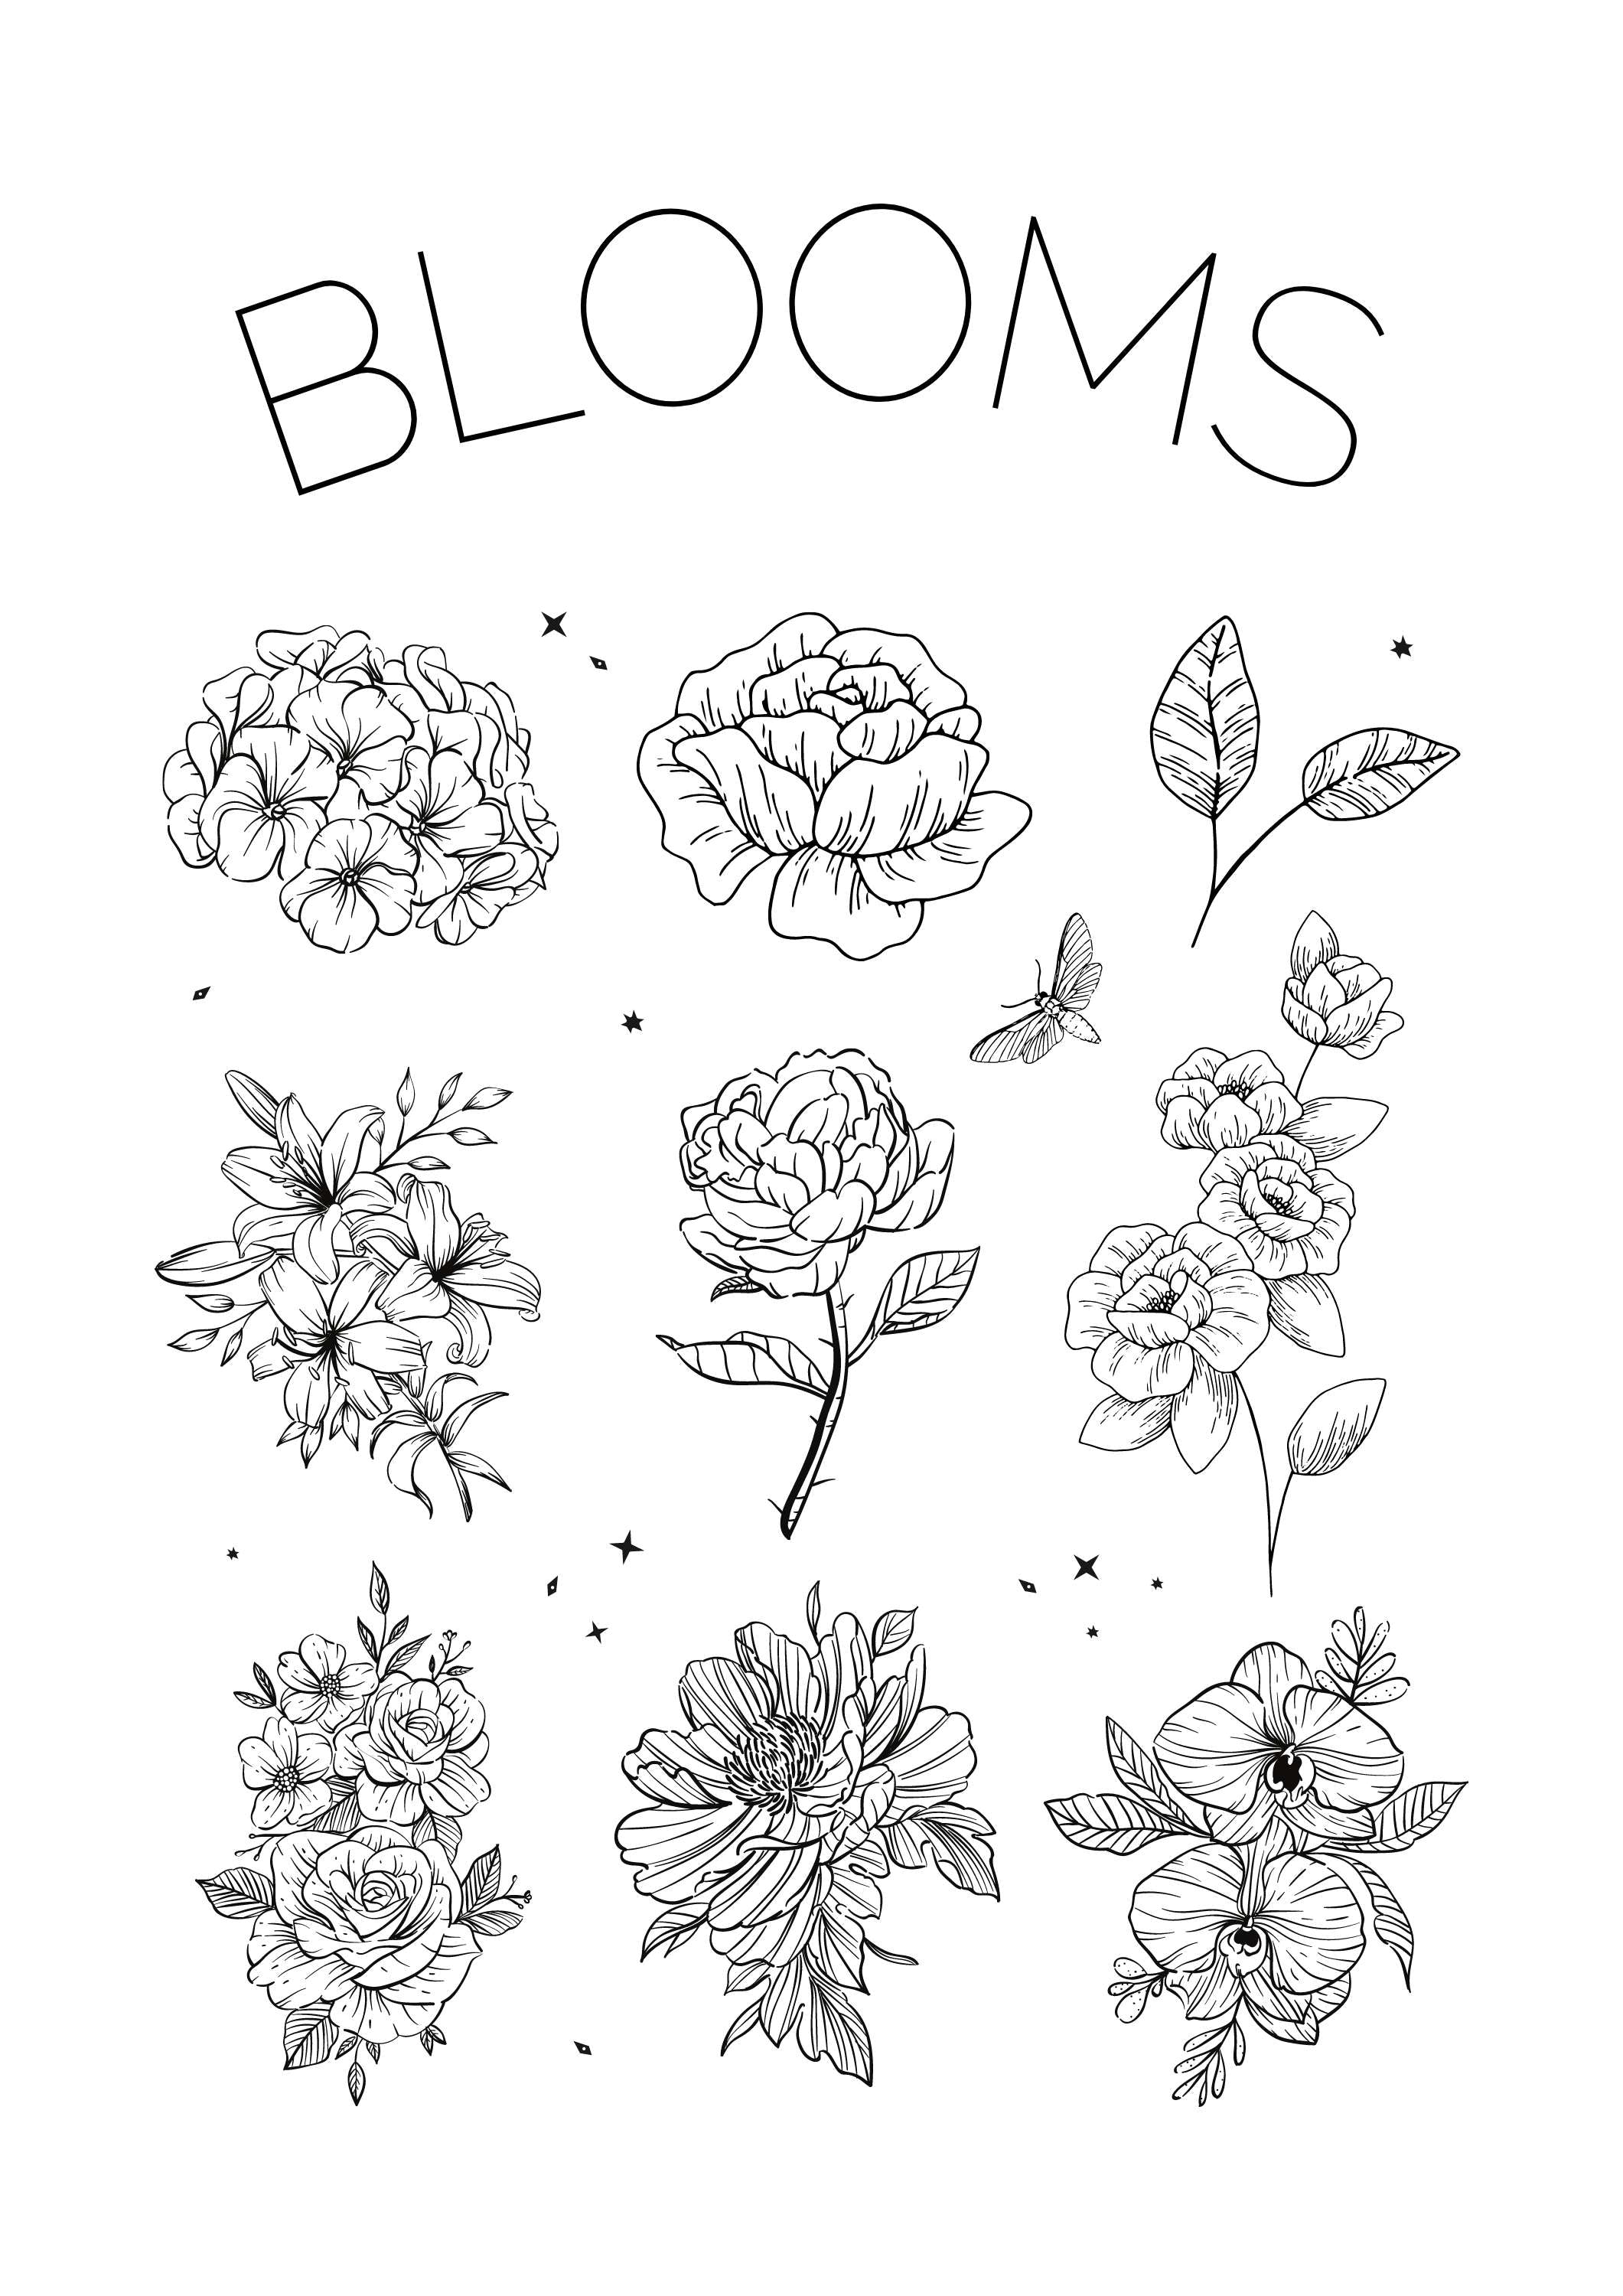 Blooms Coloring Sheet – Office Odds and Ends